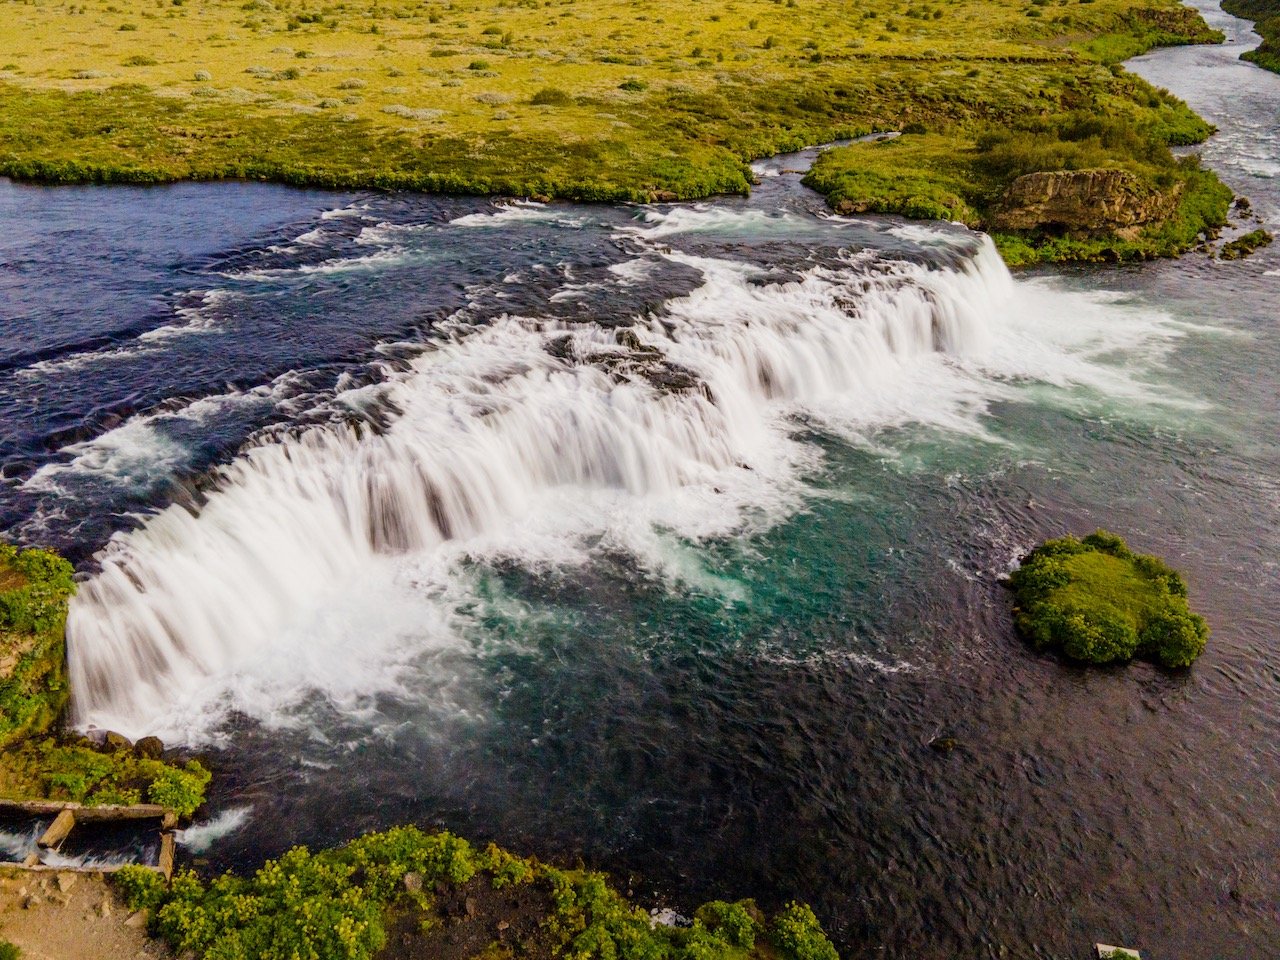   Faxifoss Waterfall, Iceland (ISO 560, 4.5 mm,  f /2.8, 1/5 s)  